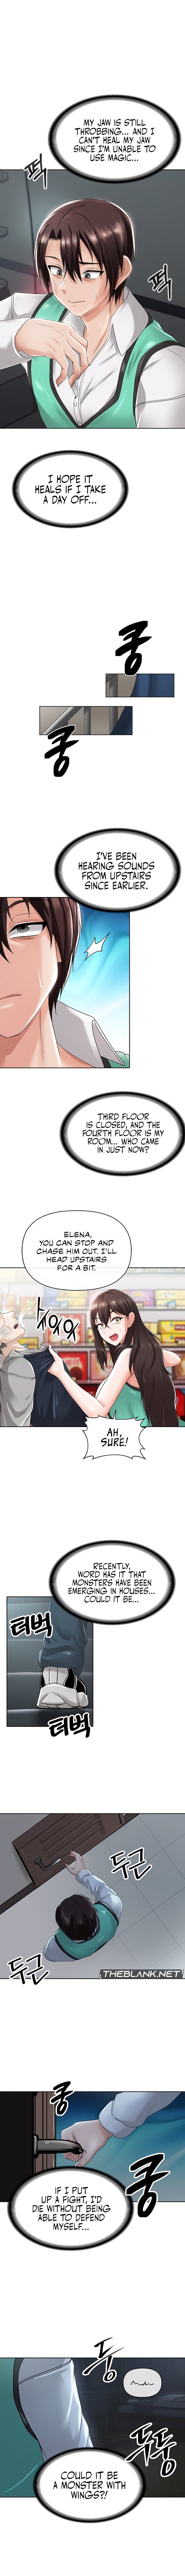 welcome-to-the-isekai-convenience-store-chap-8-7